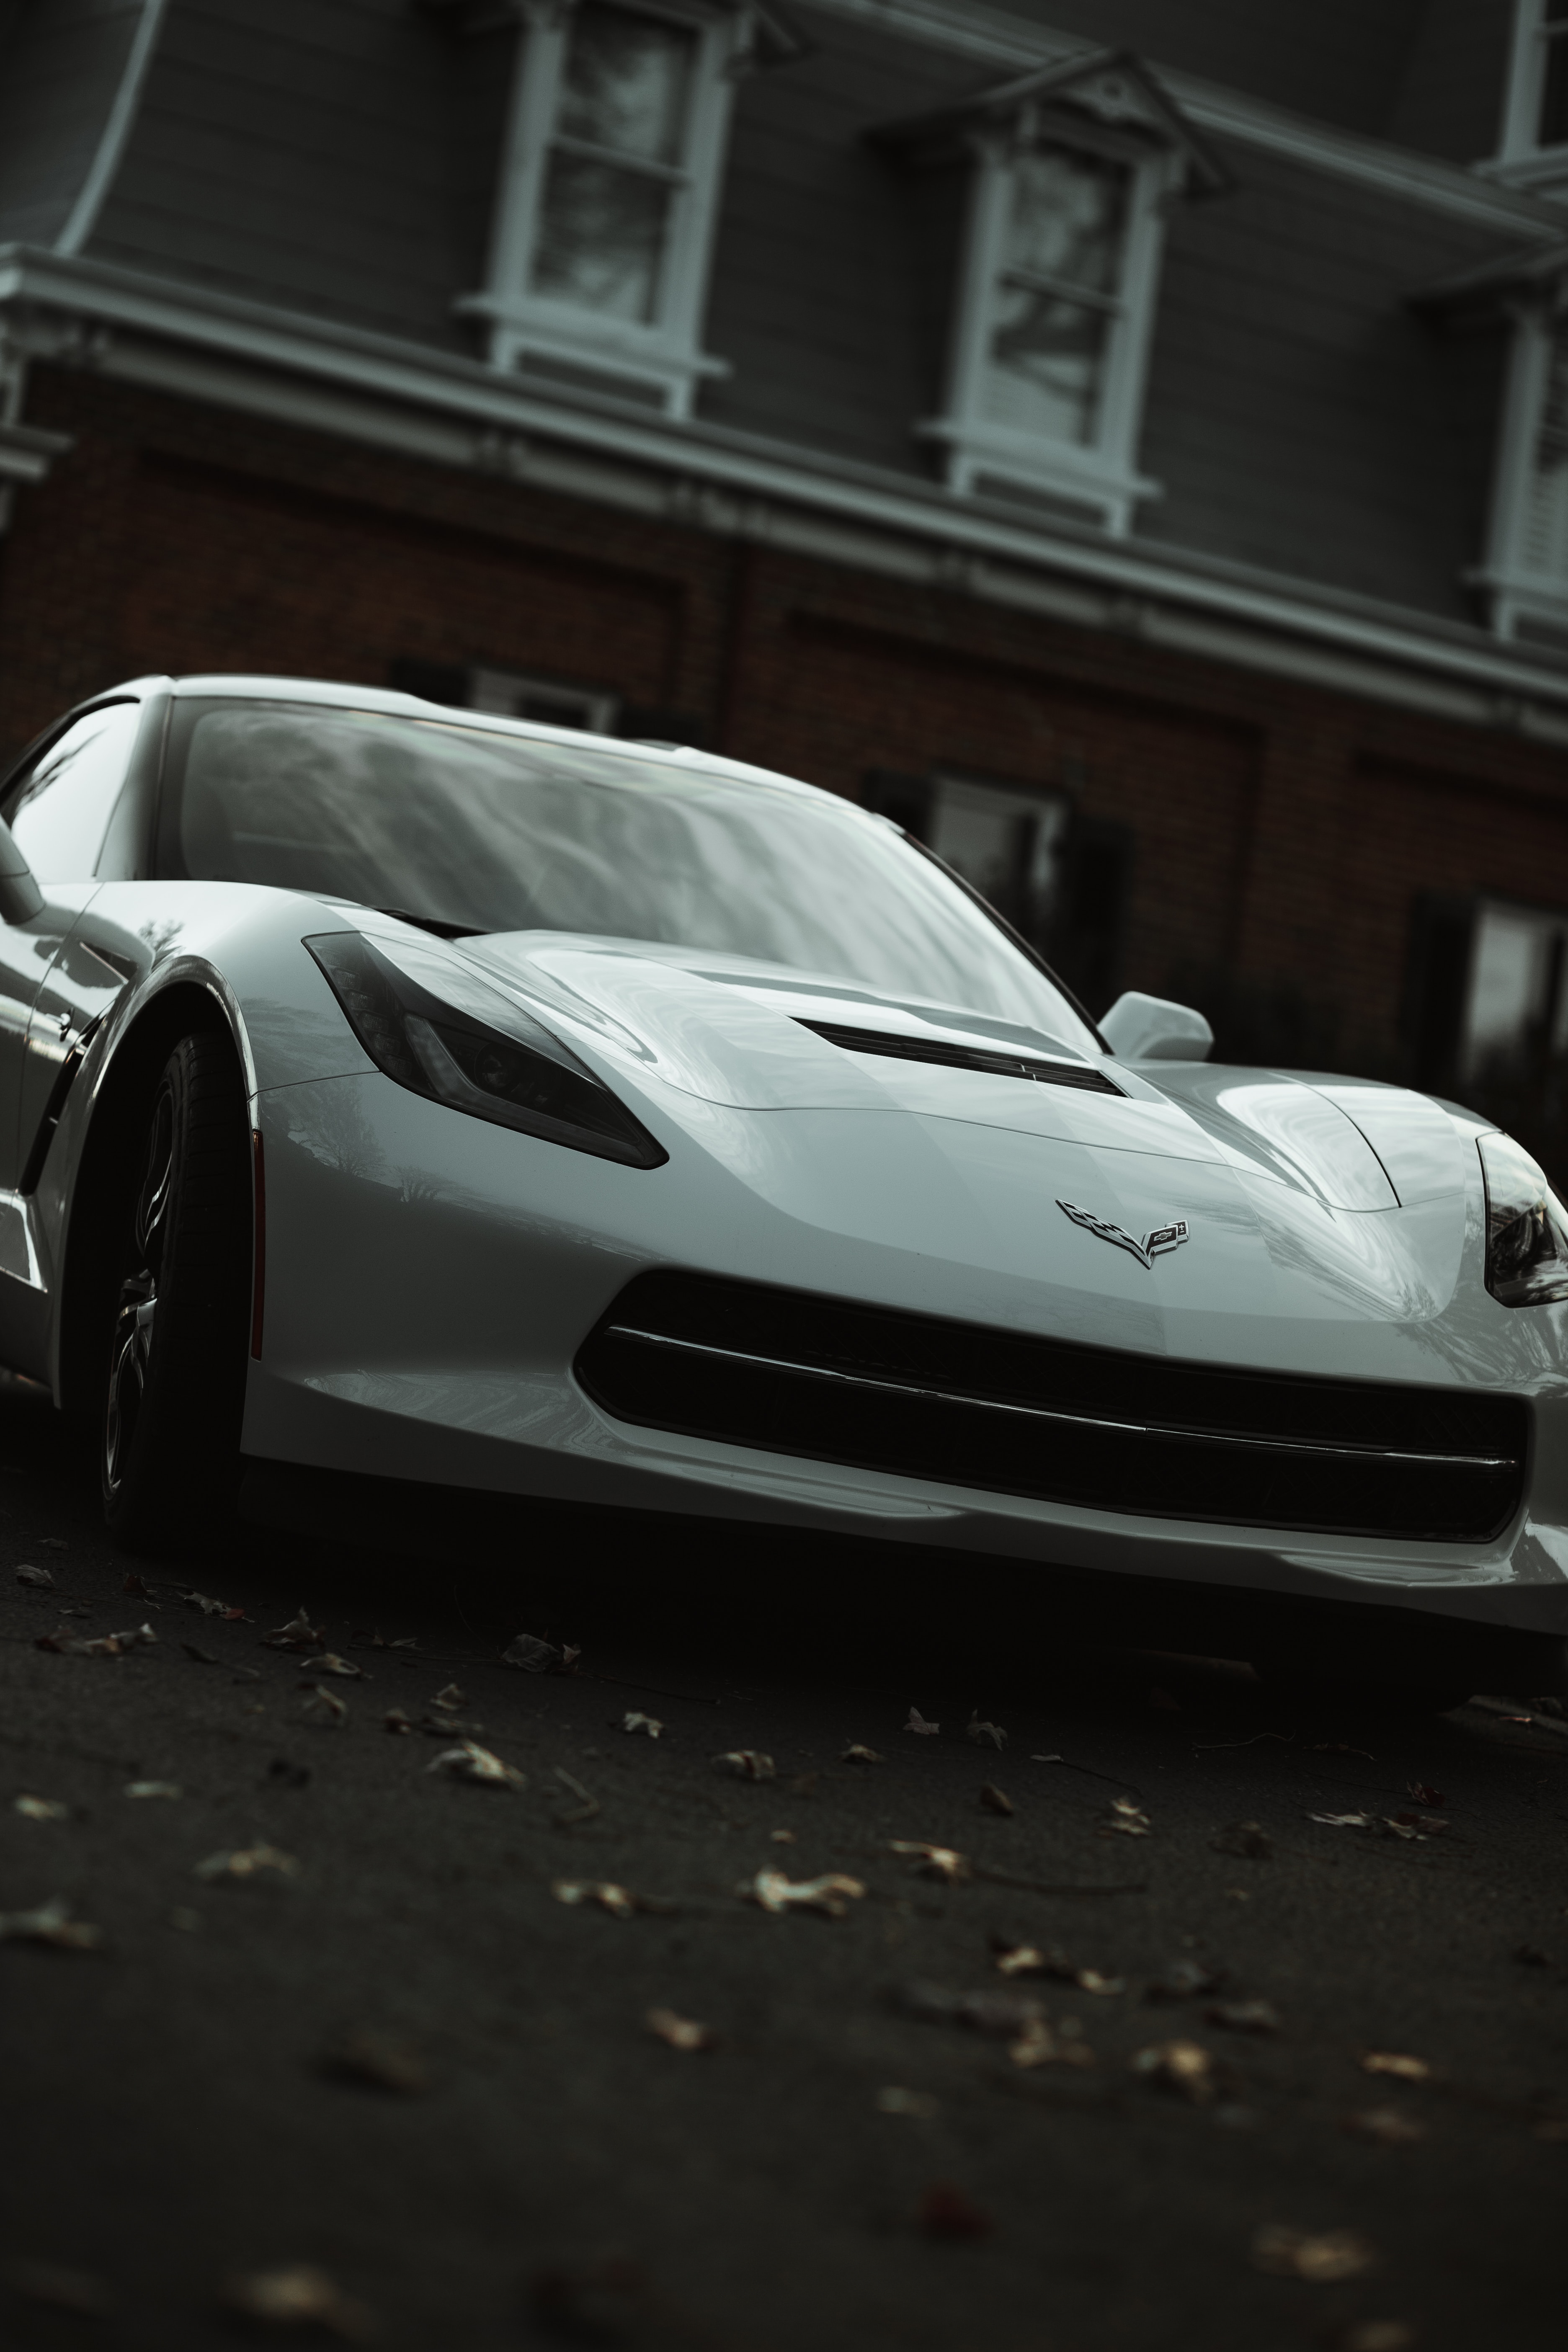 chevrolet, supercar, sports car, sports, cars, white, car, front view, machine, chevrolet corvette for android